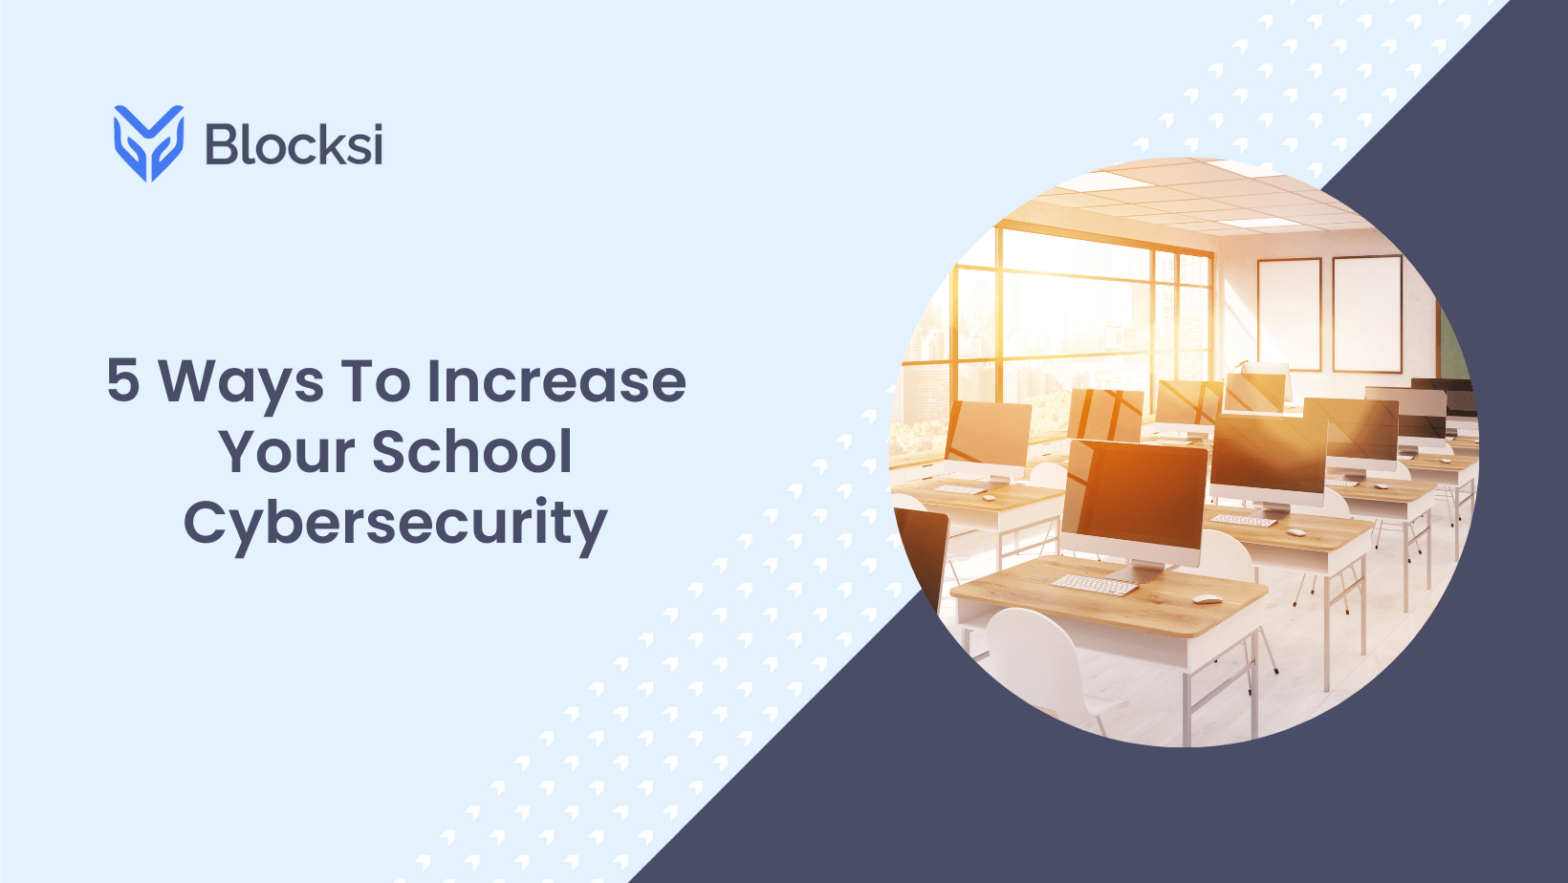 5 Ways To Increase Your School Cybersecurity